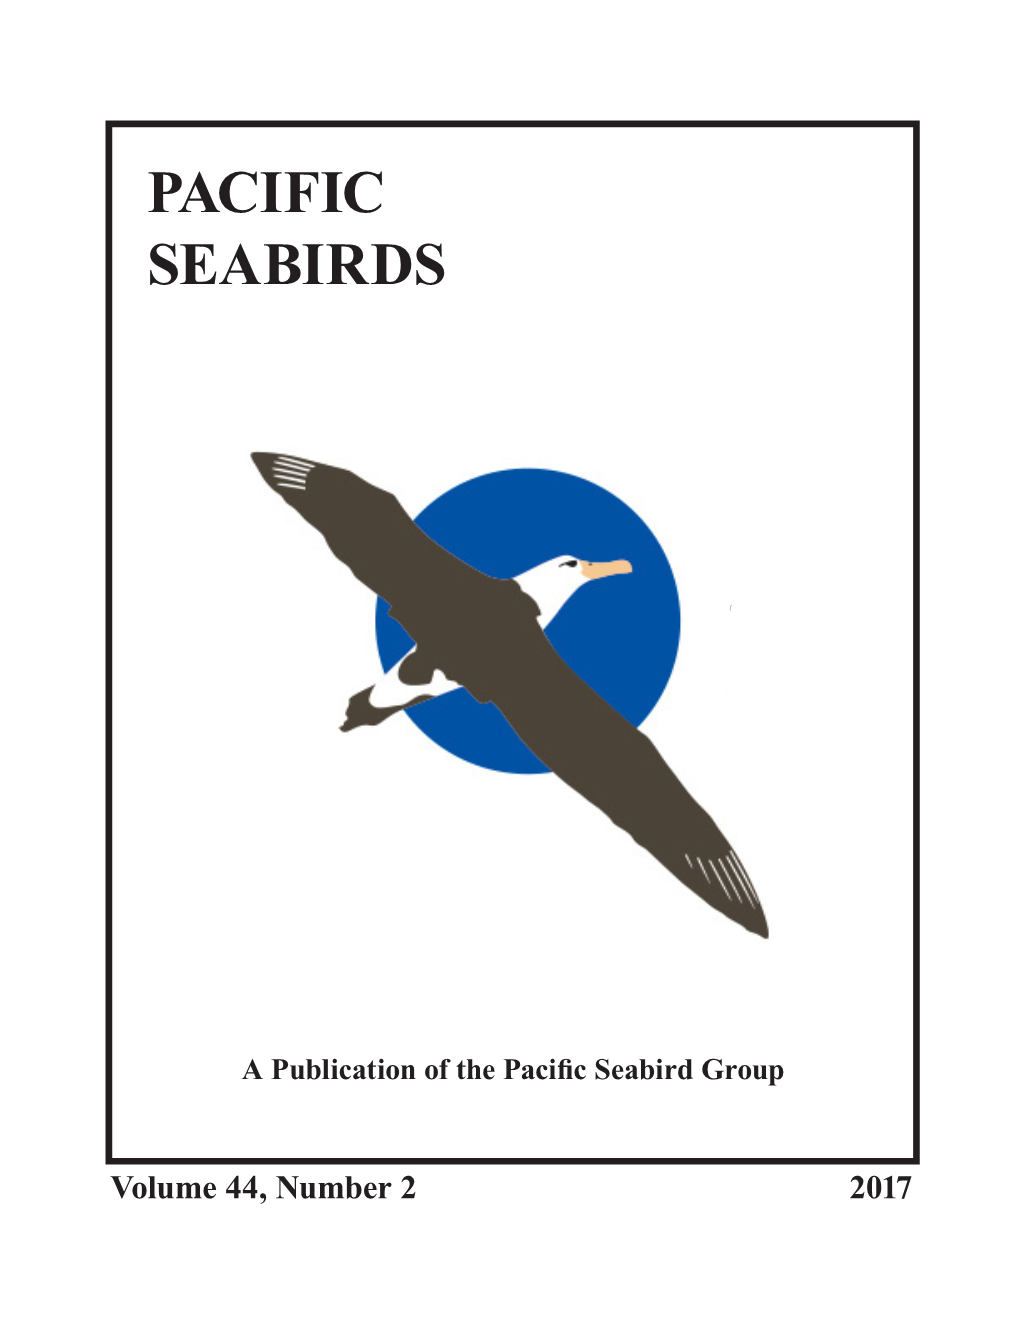 Volume 44, Number 2 2017 PACIFIC SEABIRD GROUP Dedicated to the Study and Conservation of Pacific Seabirds and Their Environment